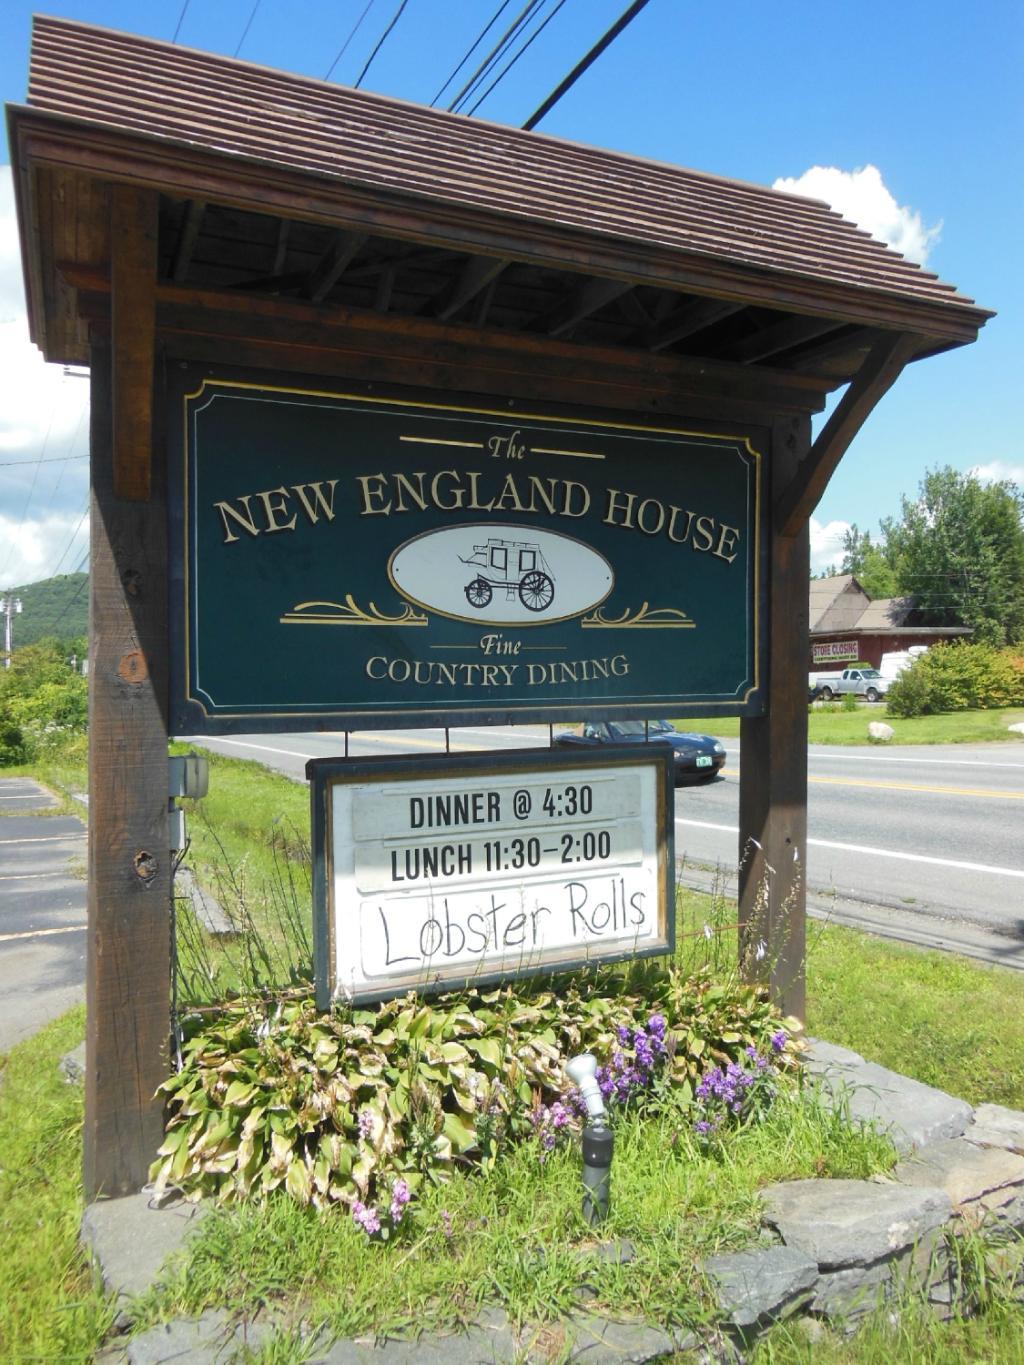 The New England House